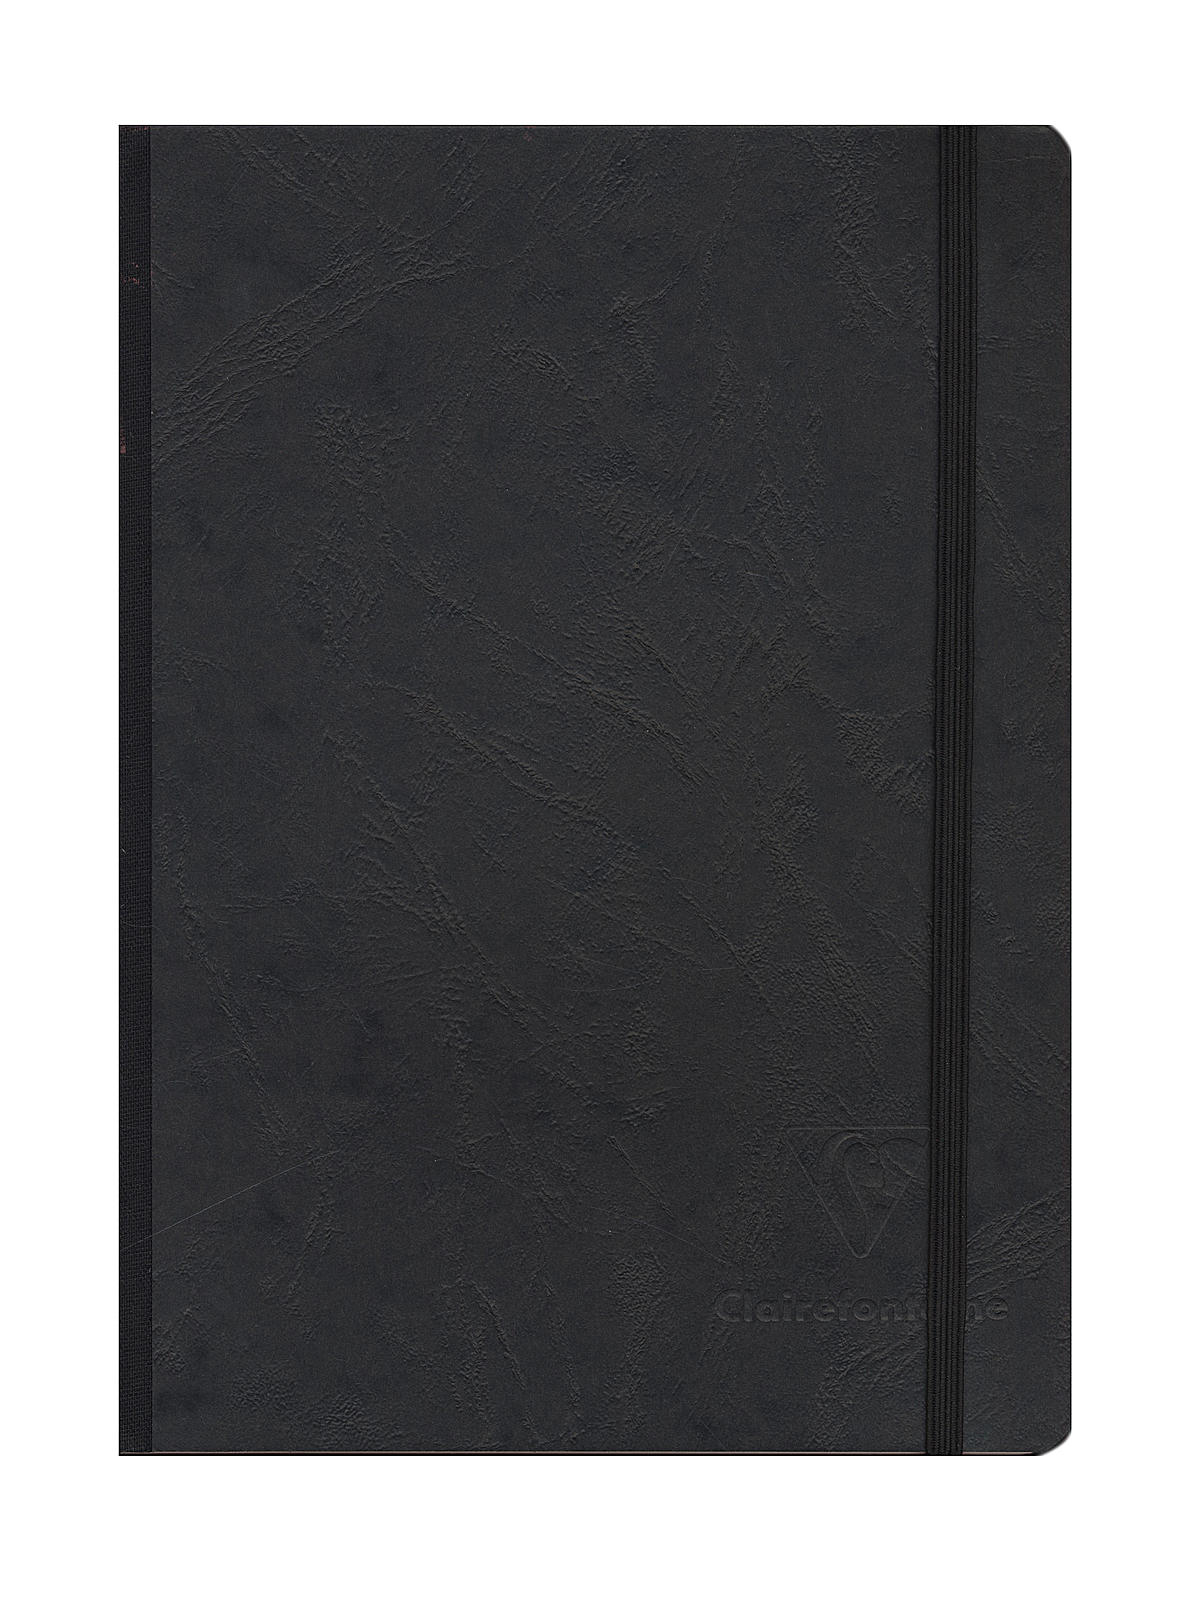 Basics Notebooks Clothbound With Elastic Closure 6 In. X 8 1 4 In. 96 Pages